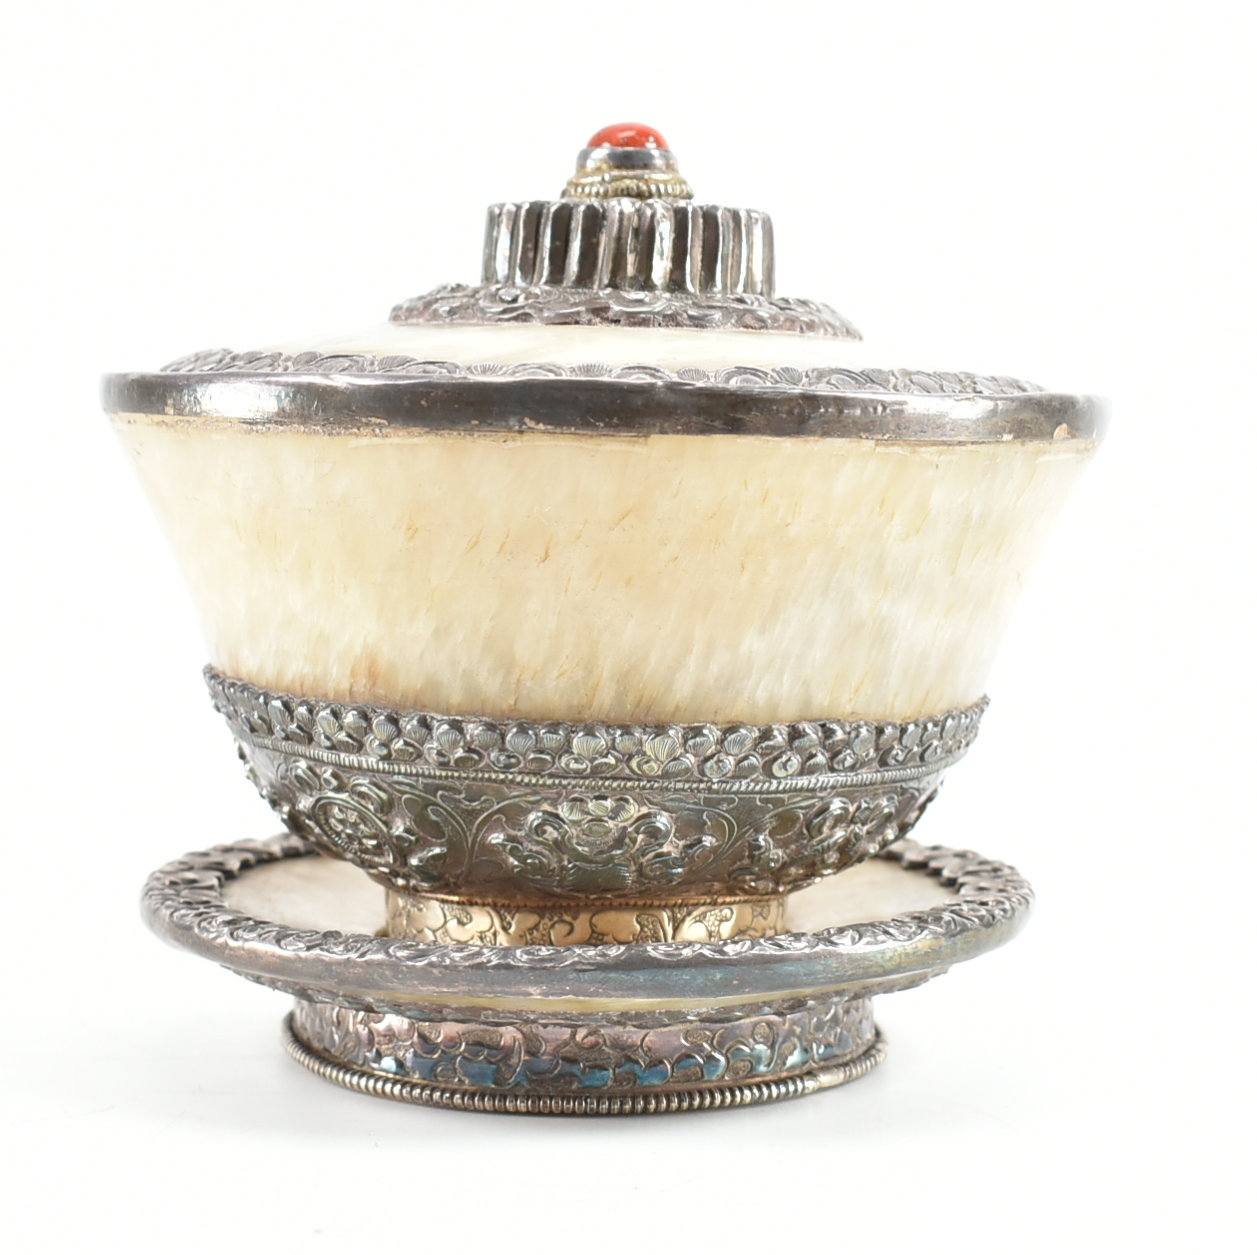 ANTIQUE TIBETAN WHITE HARD STONE CORAL & SILVER LIDDED BOWL - Image 3 of 8